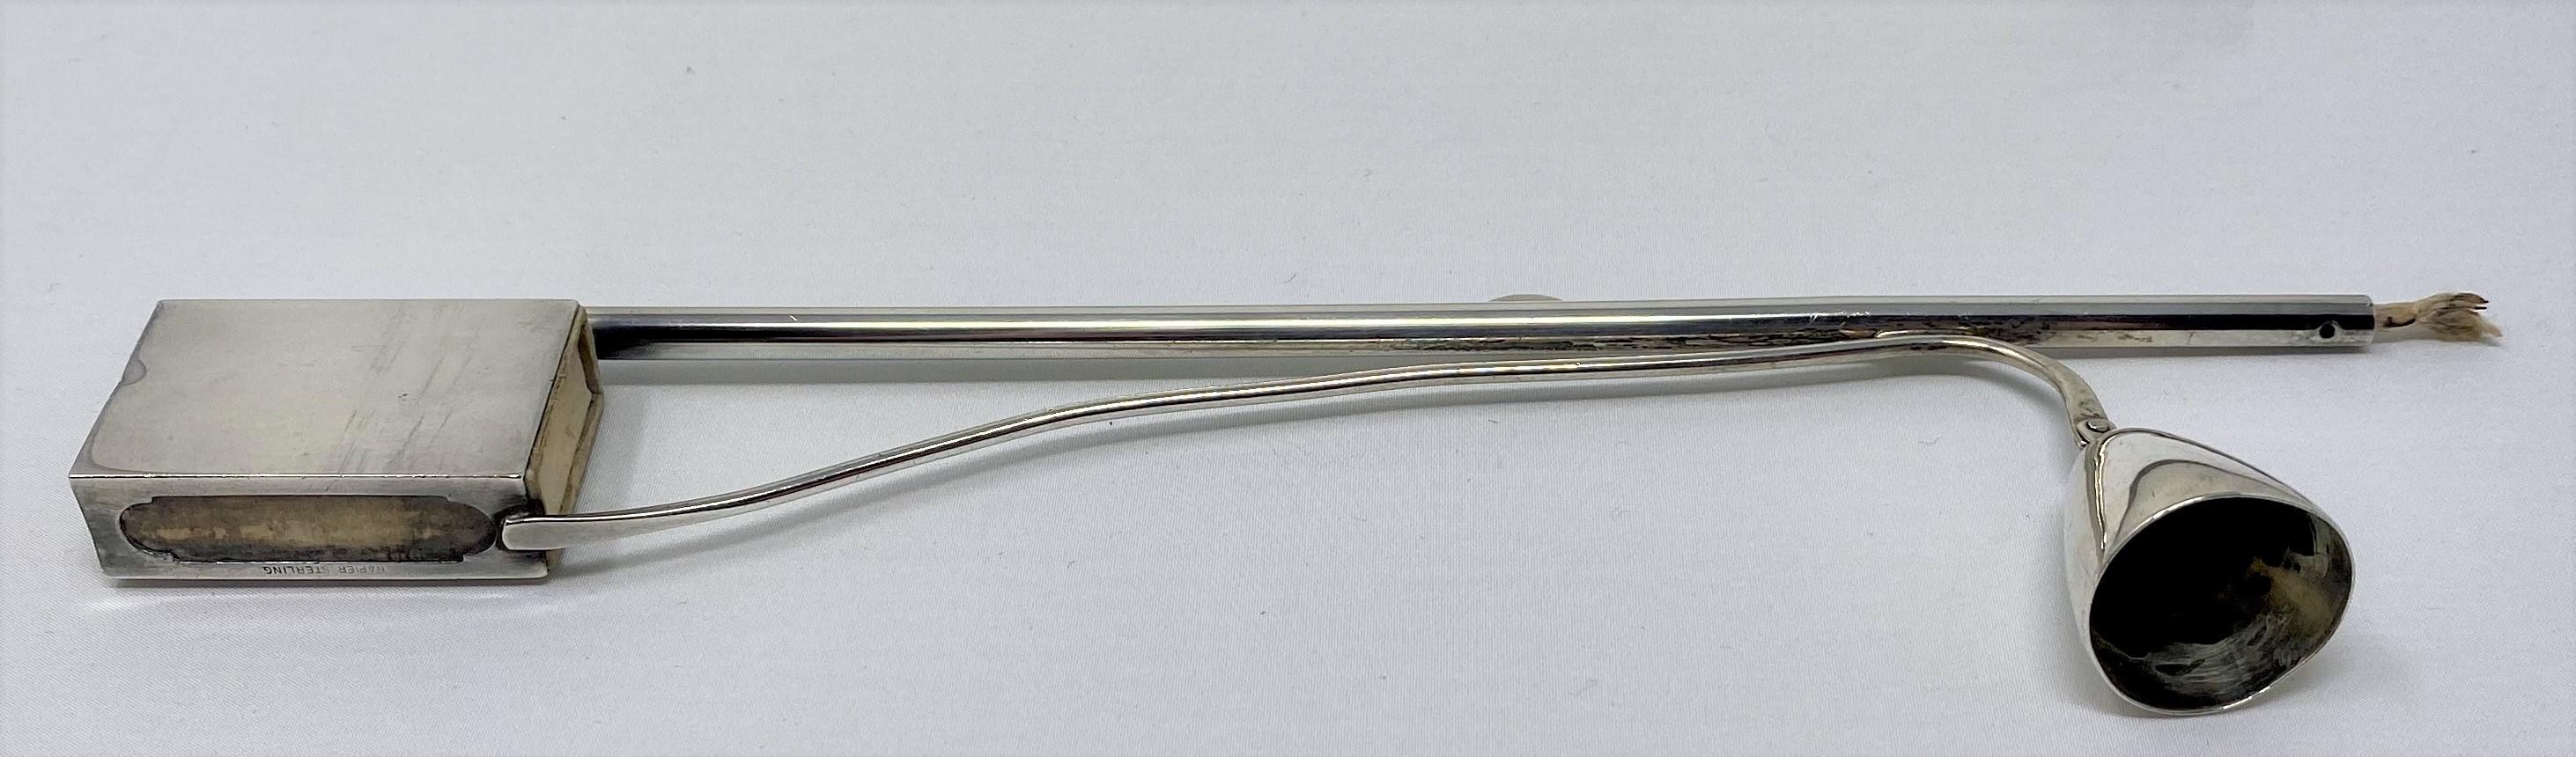 Rare antique American silver plate candle snuffer, lighter and matchbox holder, circa 1910.